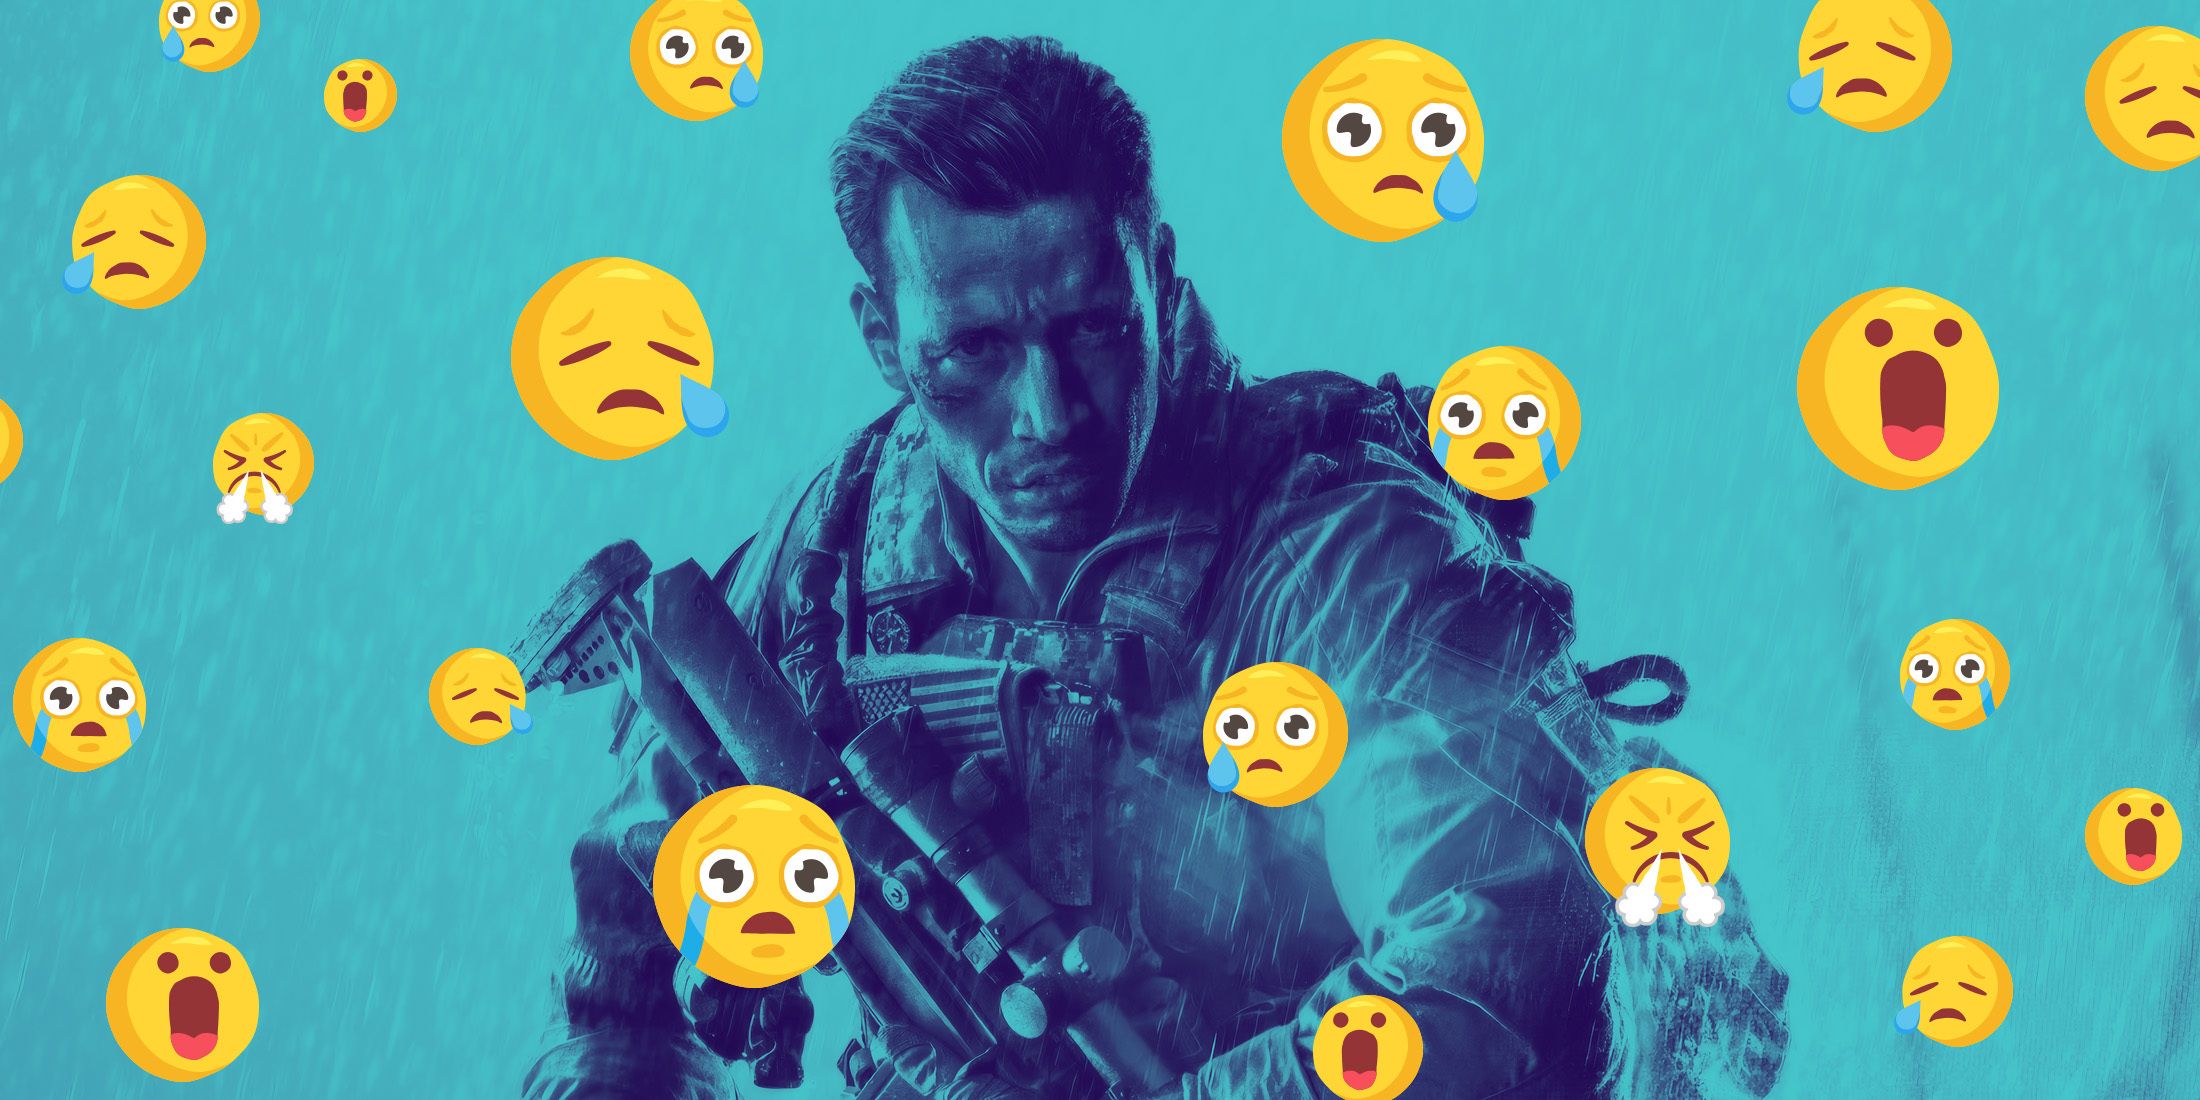 battlefield soldier with crying emojis